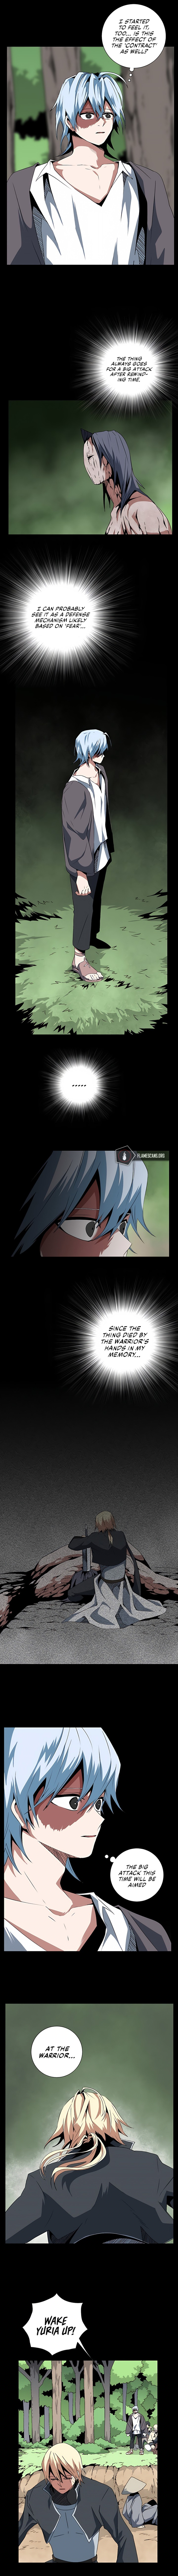 One Step For The Dark Lord Chapter 15 Page 7